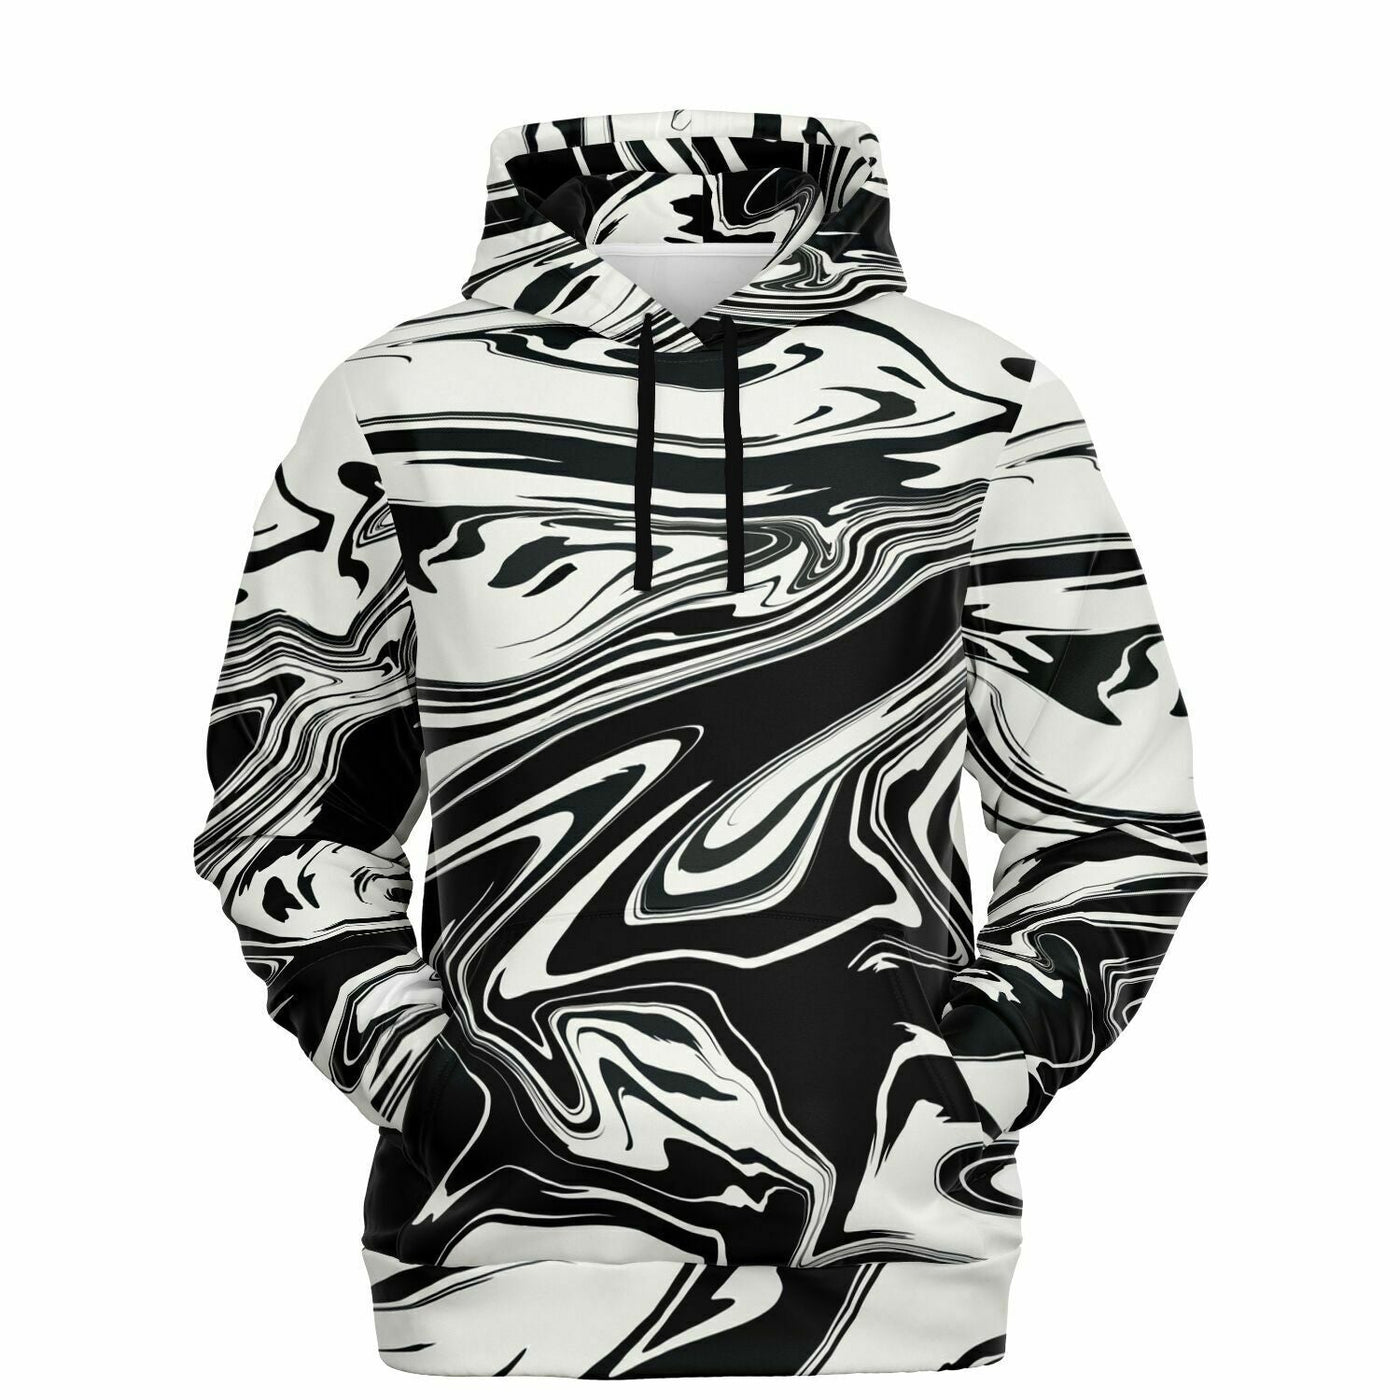 Wavy Black & White Abstract Psychedelic Pattern Fashion Hoodie